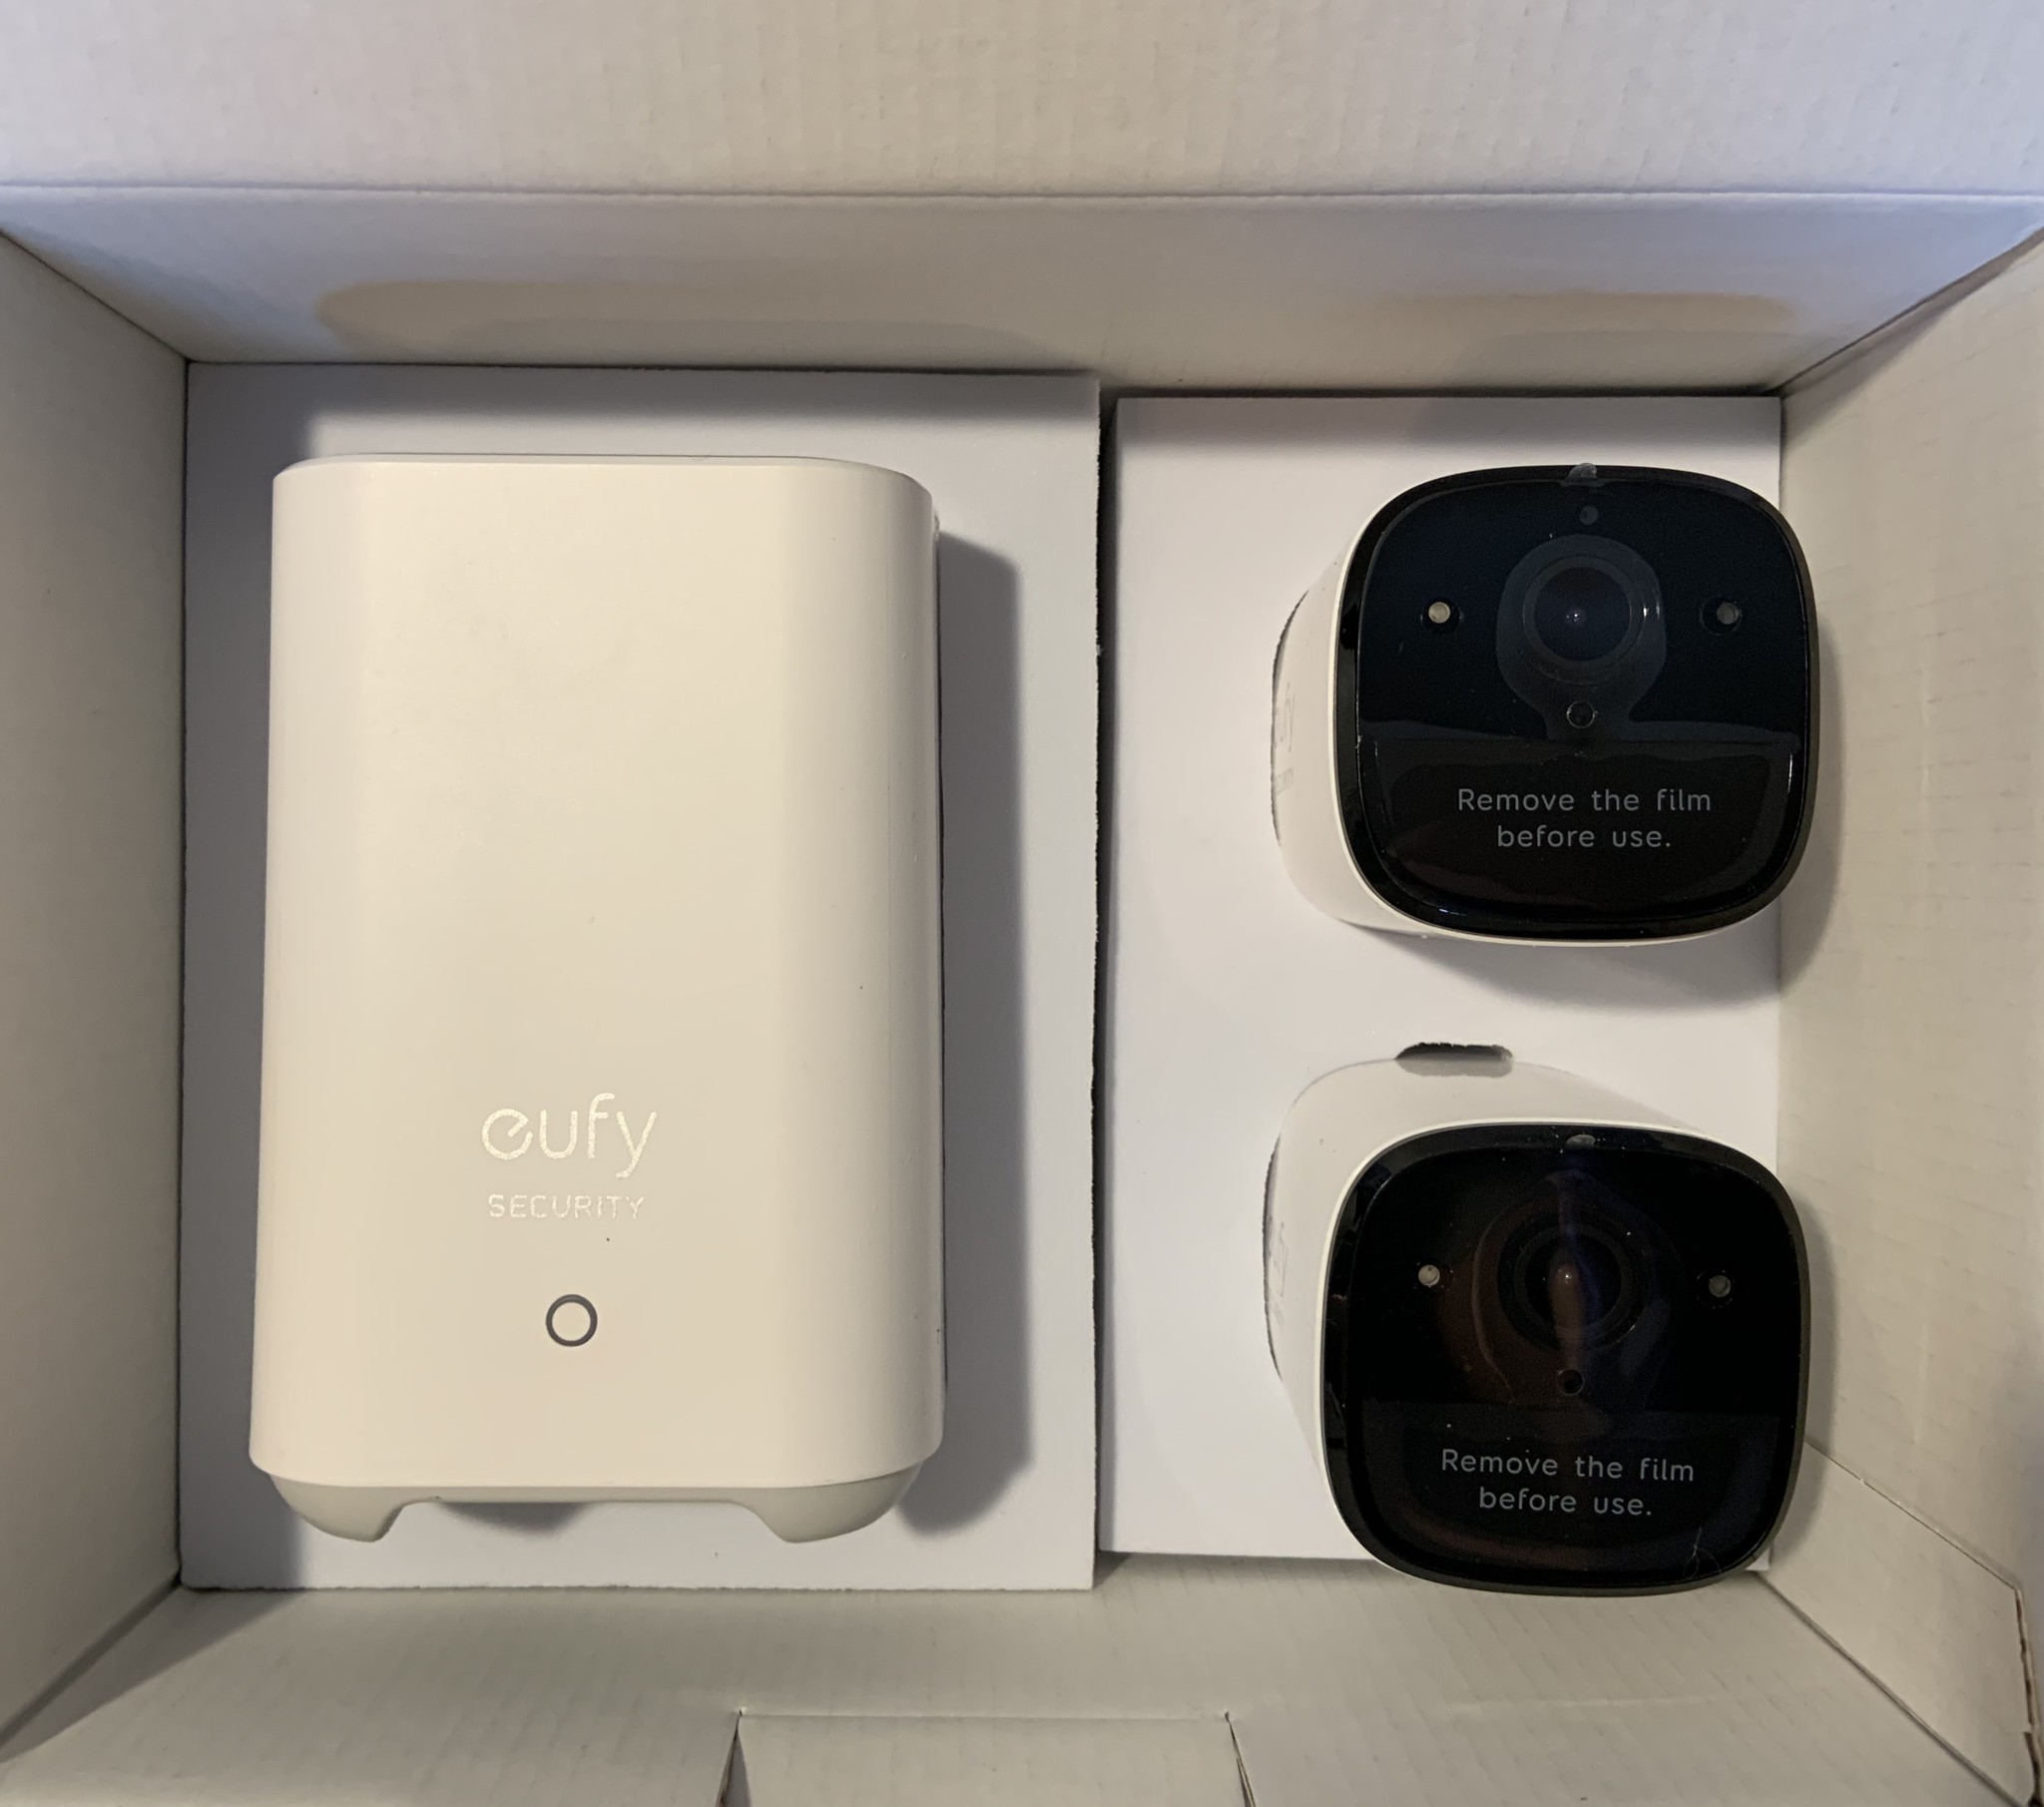 eufyCam 2 homebase and 2 cameras in packaging